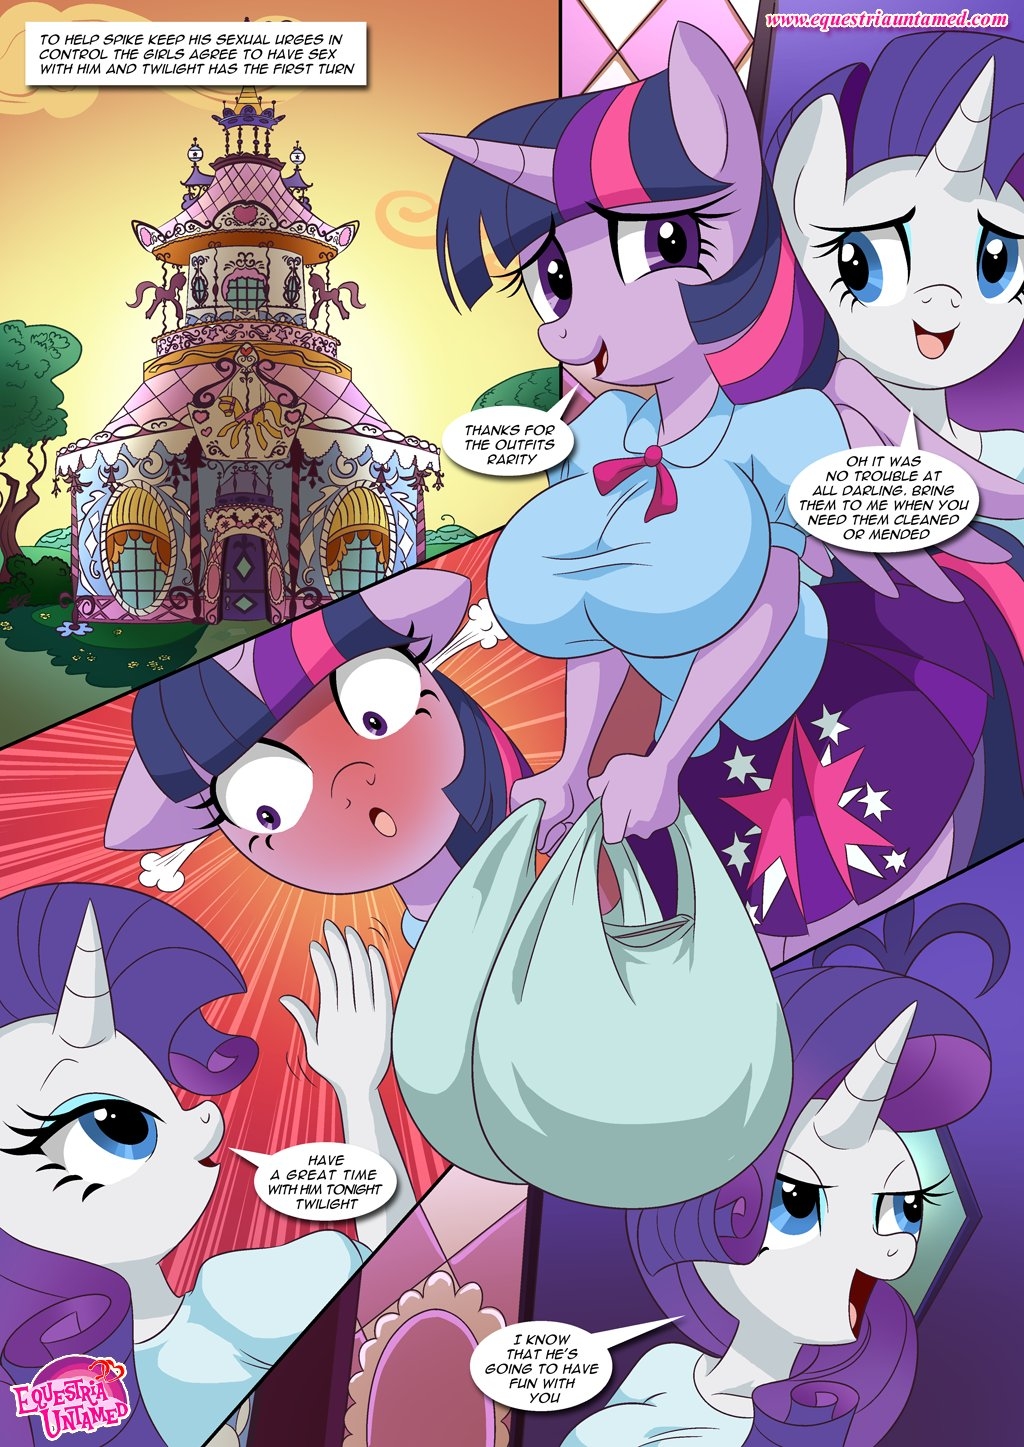 [Palcomix] Sex Ed with Miss Twilight Sparkle (My Little Pony Friendship is Magic) 1